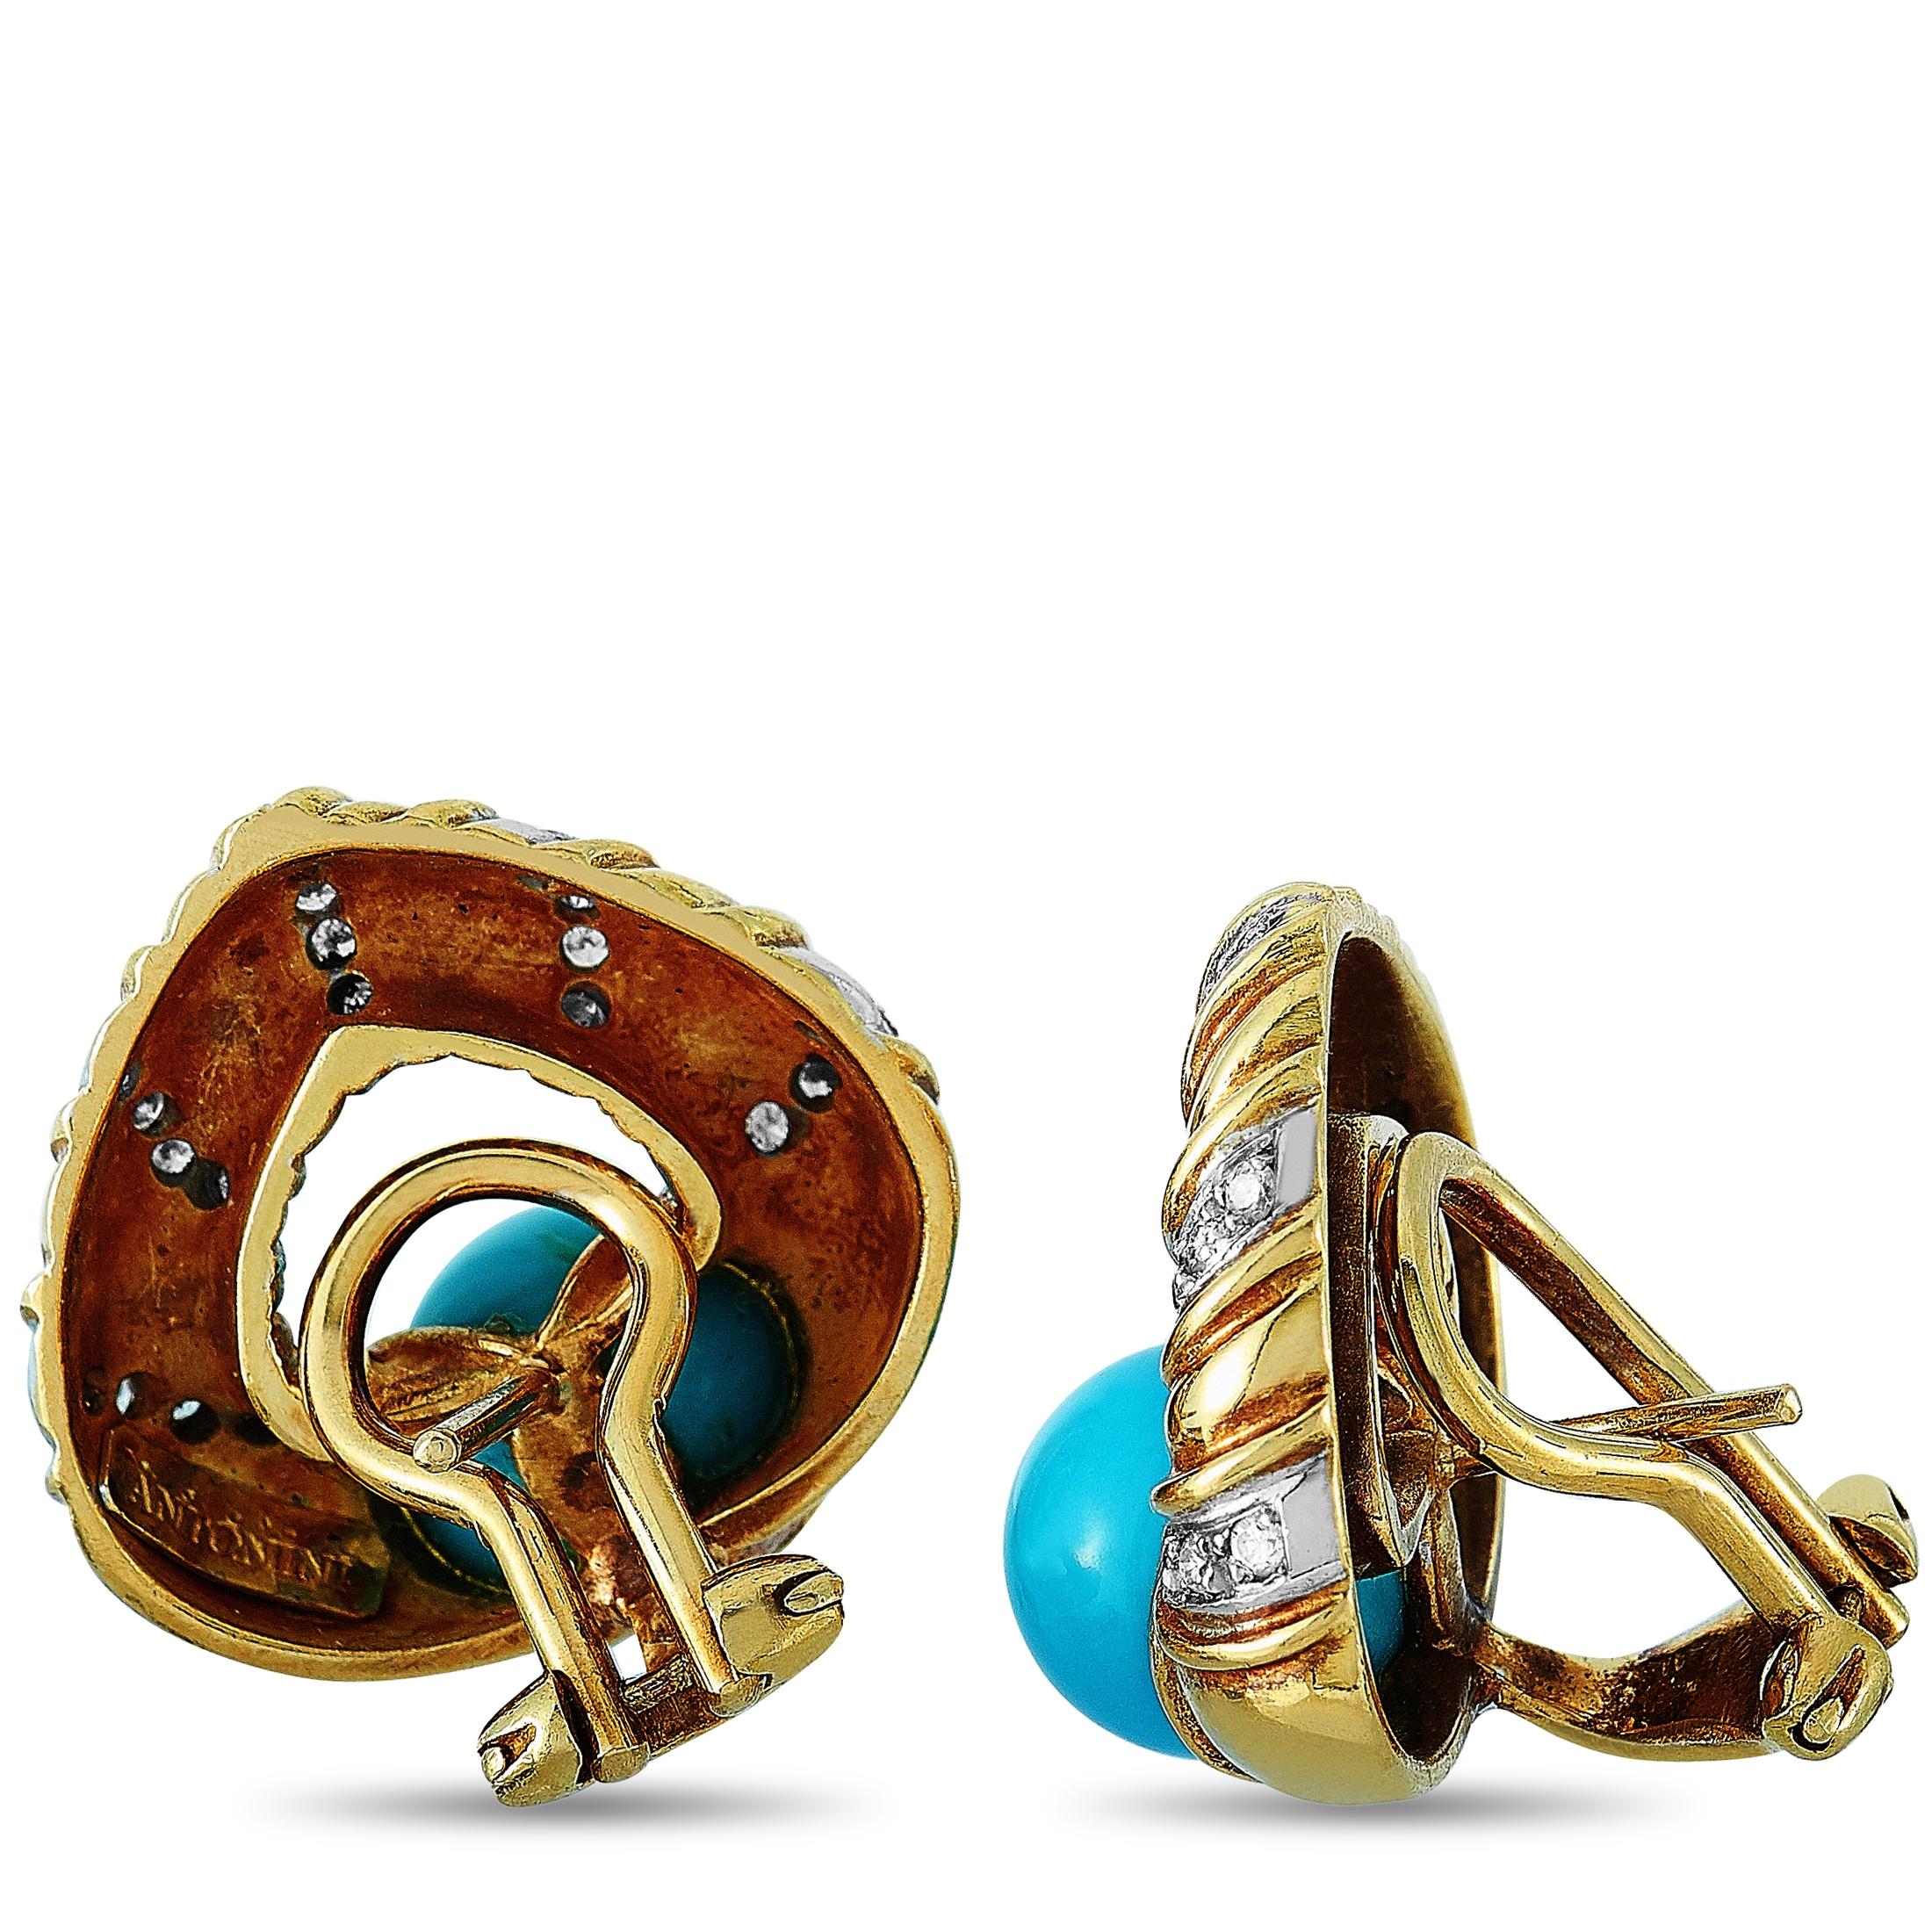 These Antonini earrings are made of 18K yellow gold and each of the two weighs 9.5 grams. They measure 0.75” in length and 0.75” in width. The pair is embellished with turquoise stones and a total of 0.42 carats of diamonds.
 
 The earrings are